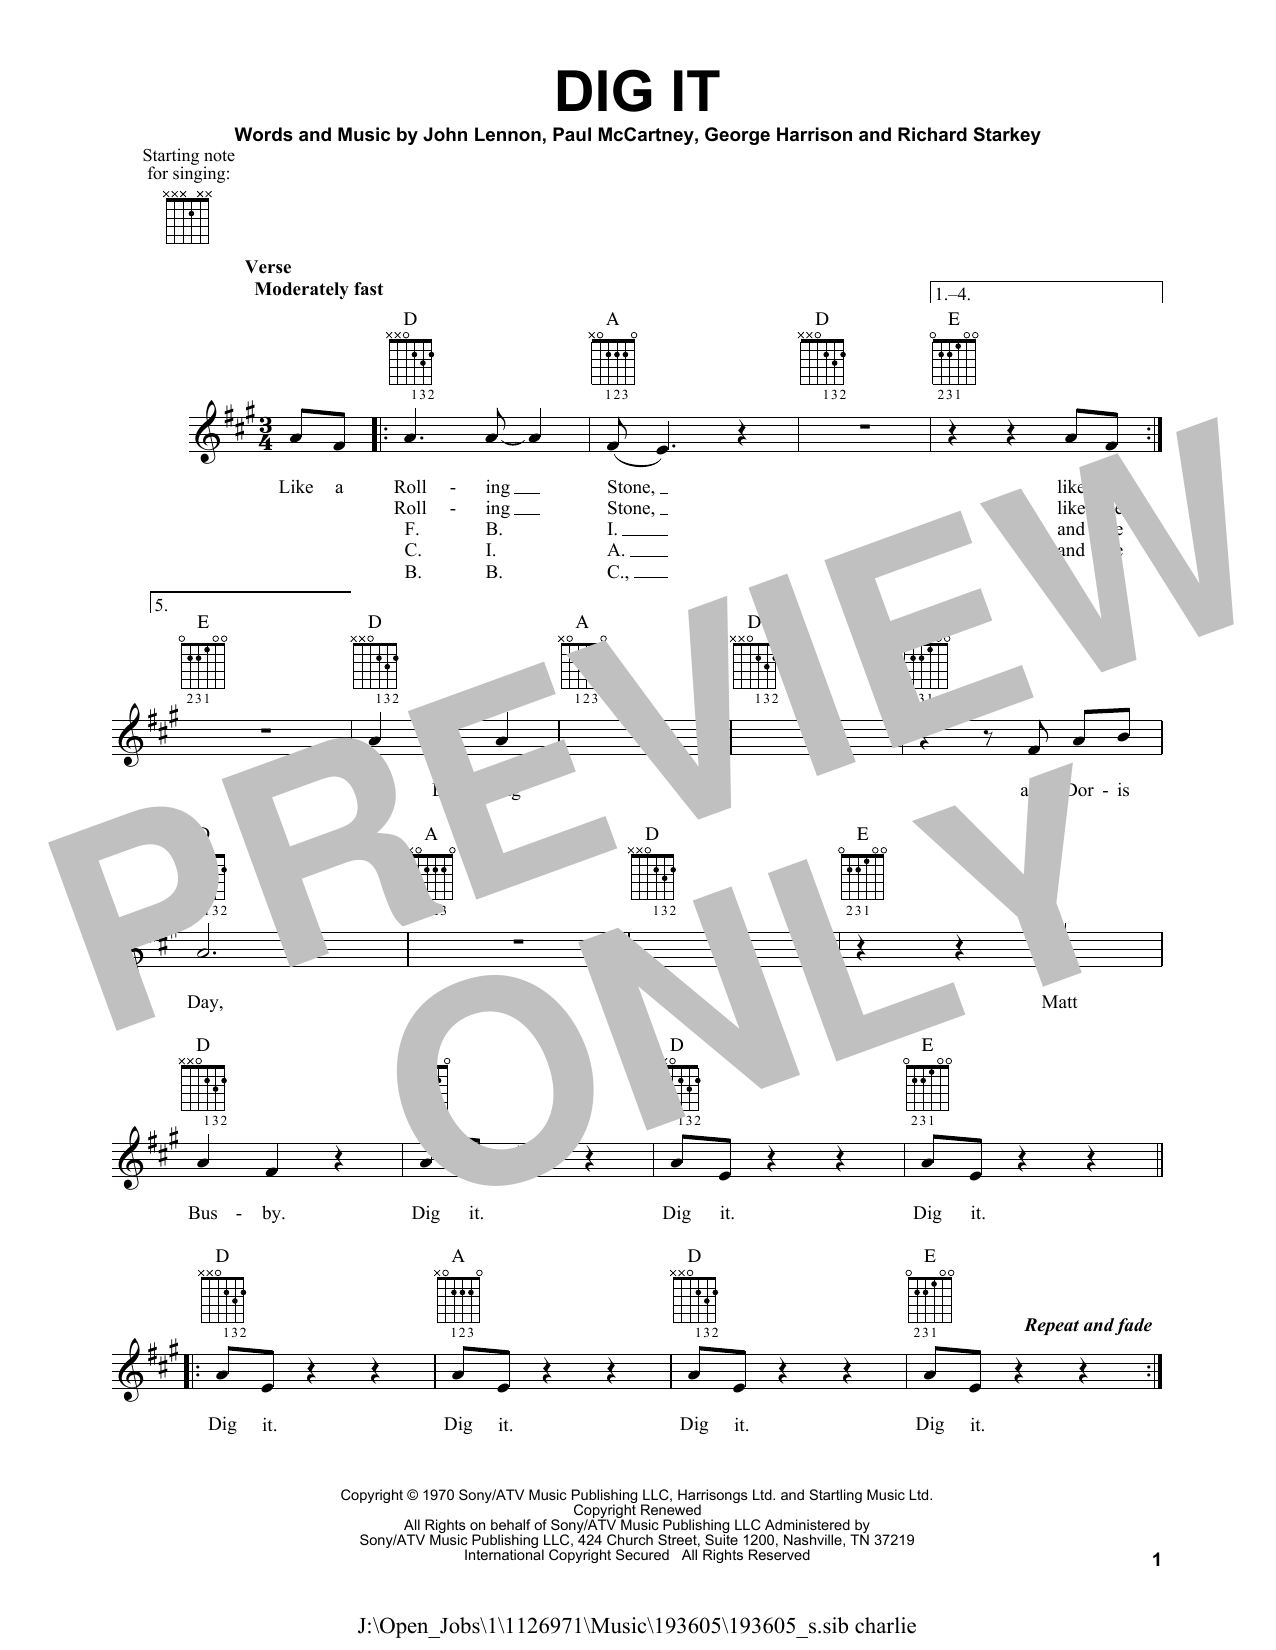 Download The Beatles Dig It Sheet Music